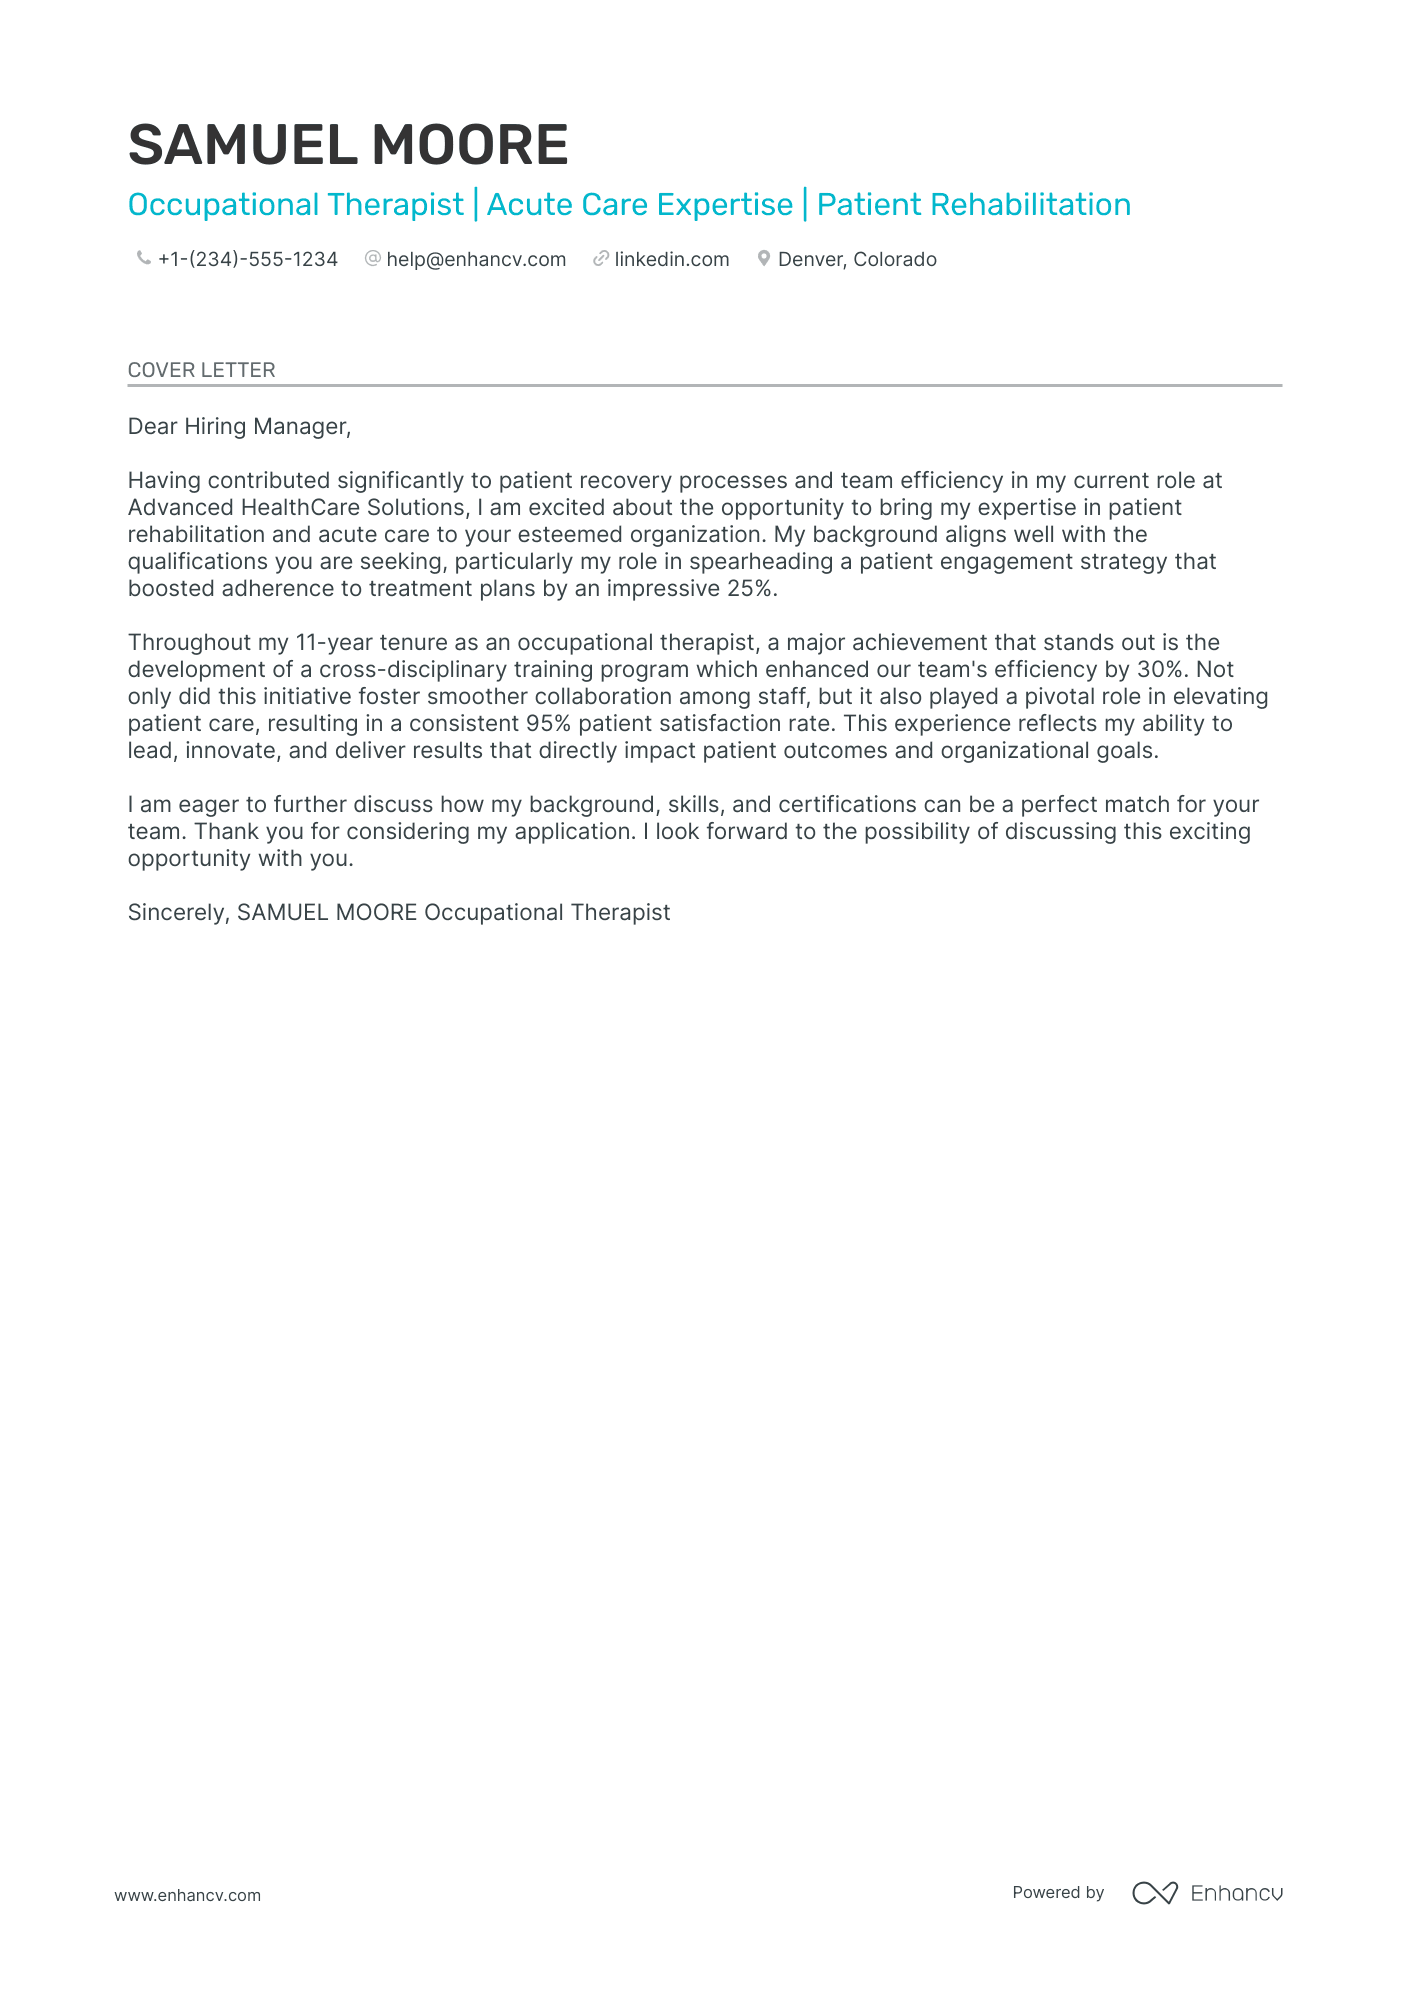 Occupational Therapist cover letter